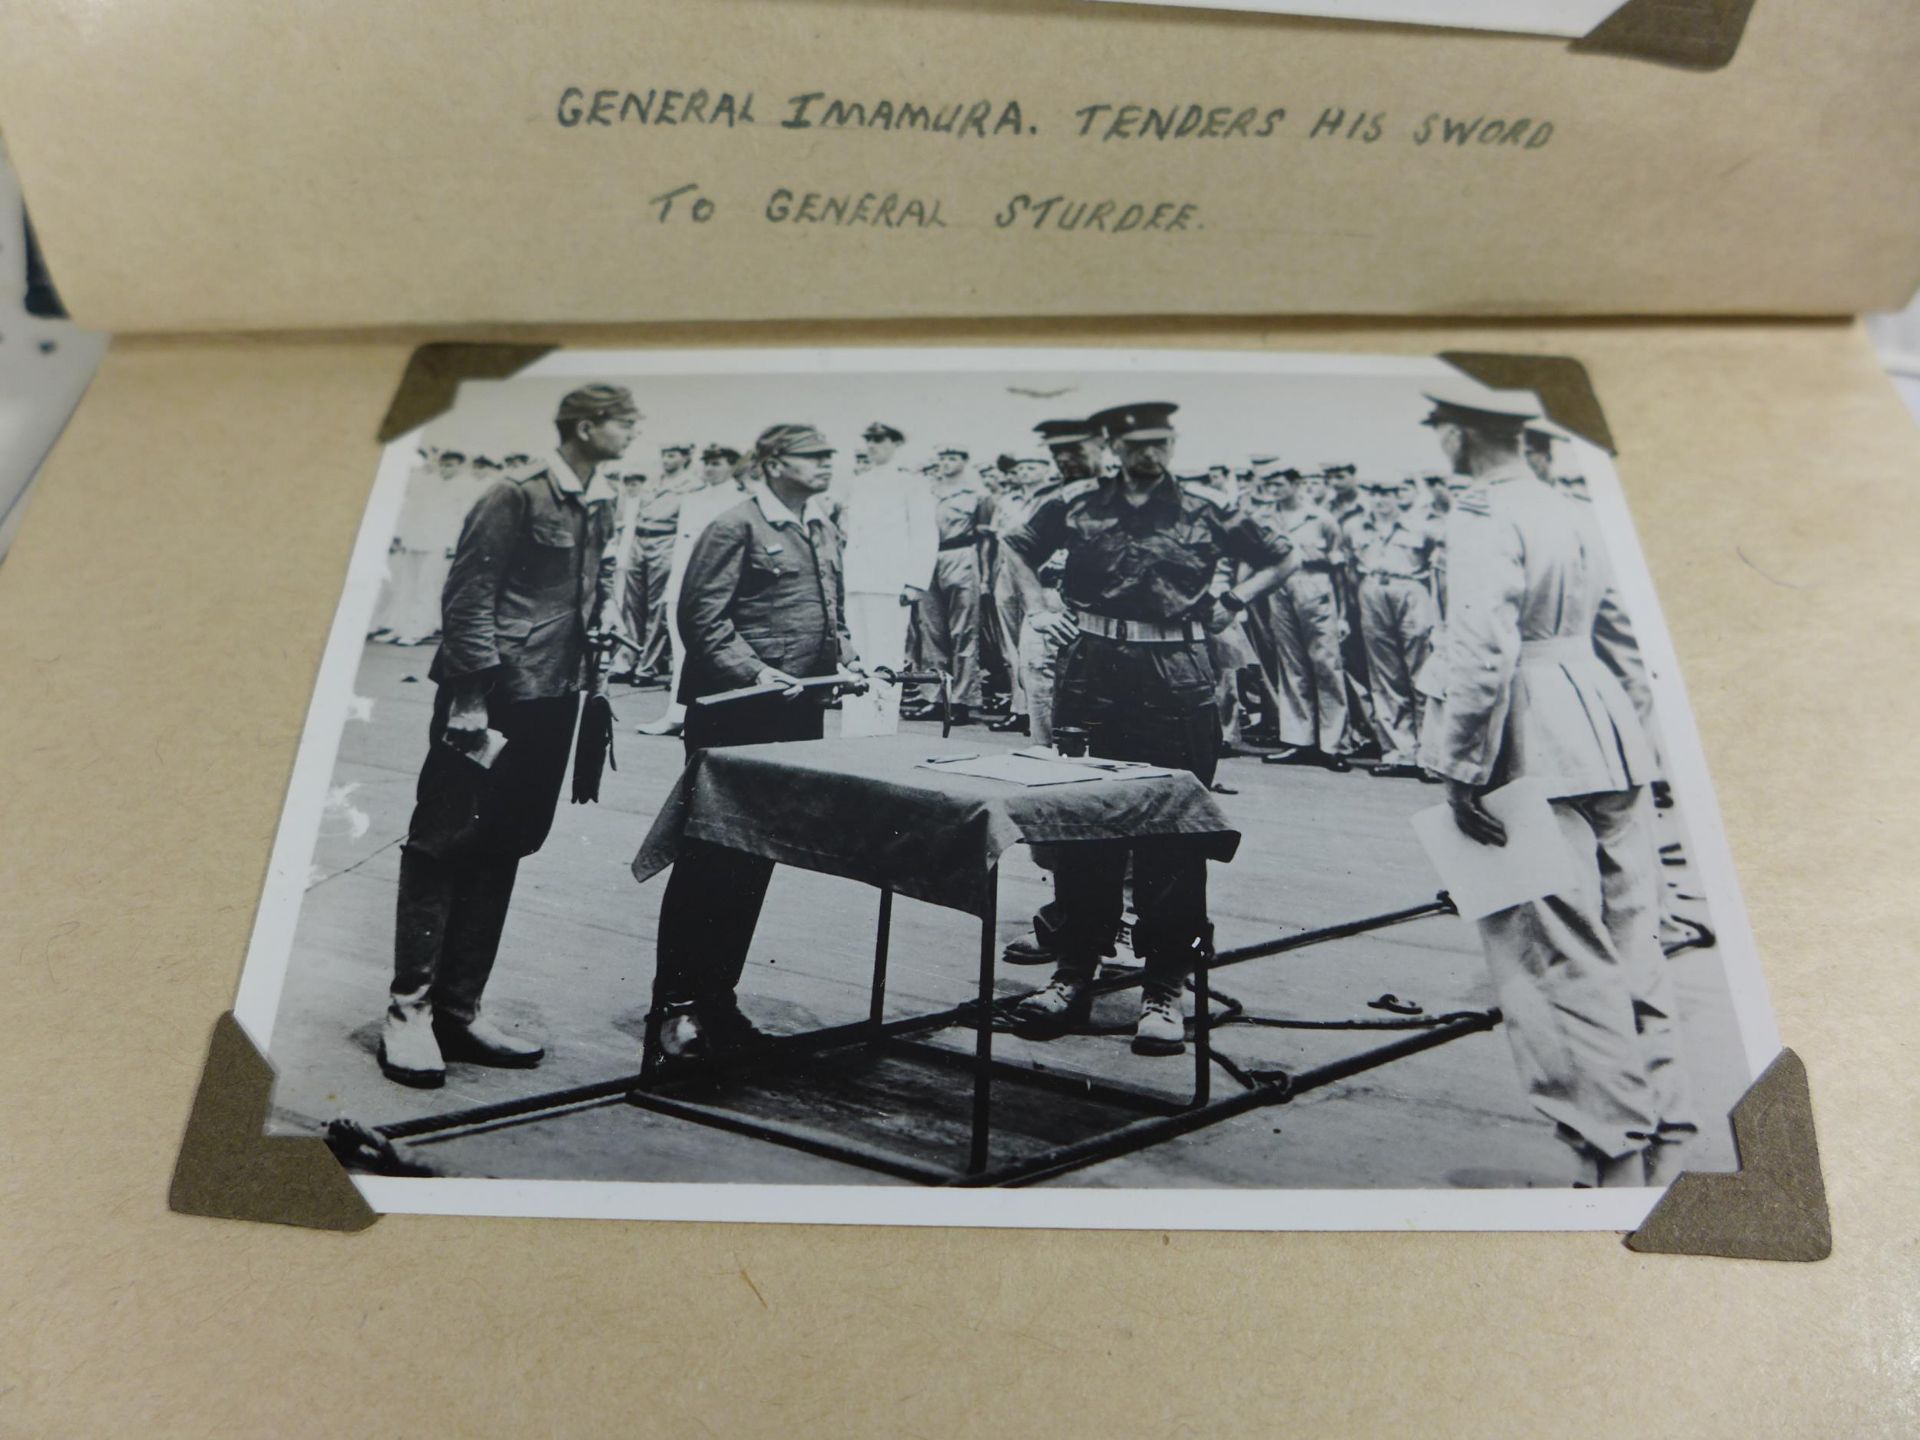 A WORLD WAR II PHOTOGRAPH ALBUM CONTAINING PHOTOGRAPHS OF THE JAPANESE SIGNING OF THE INSTRUMENT - Image 2 of 9